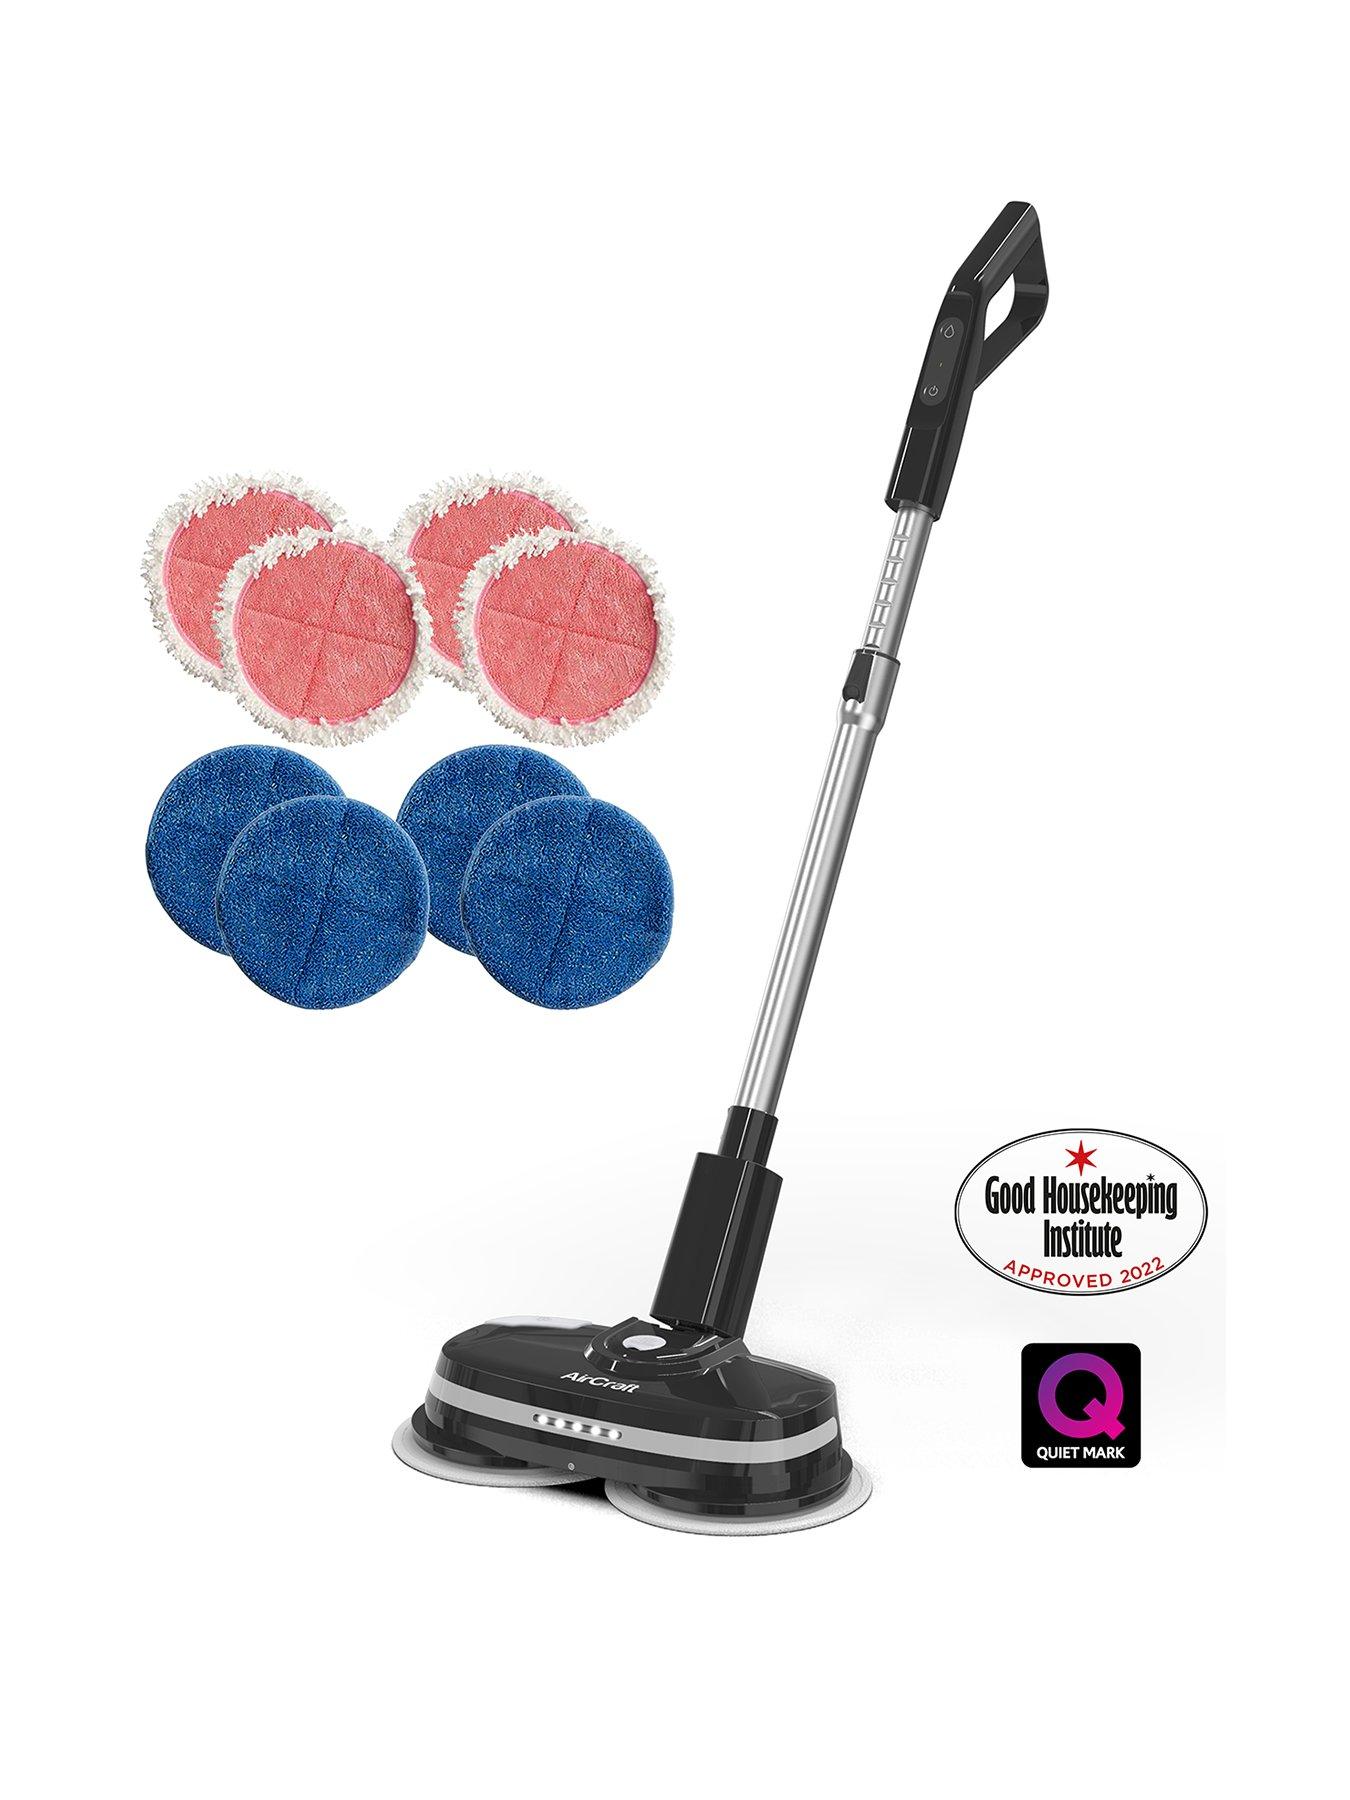 Shop Cordless Steam Mop, Buy Steam Cleaners